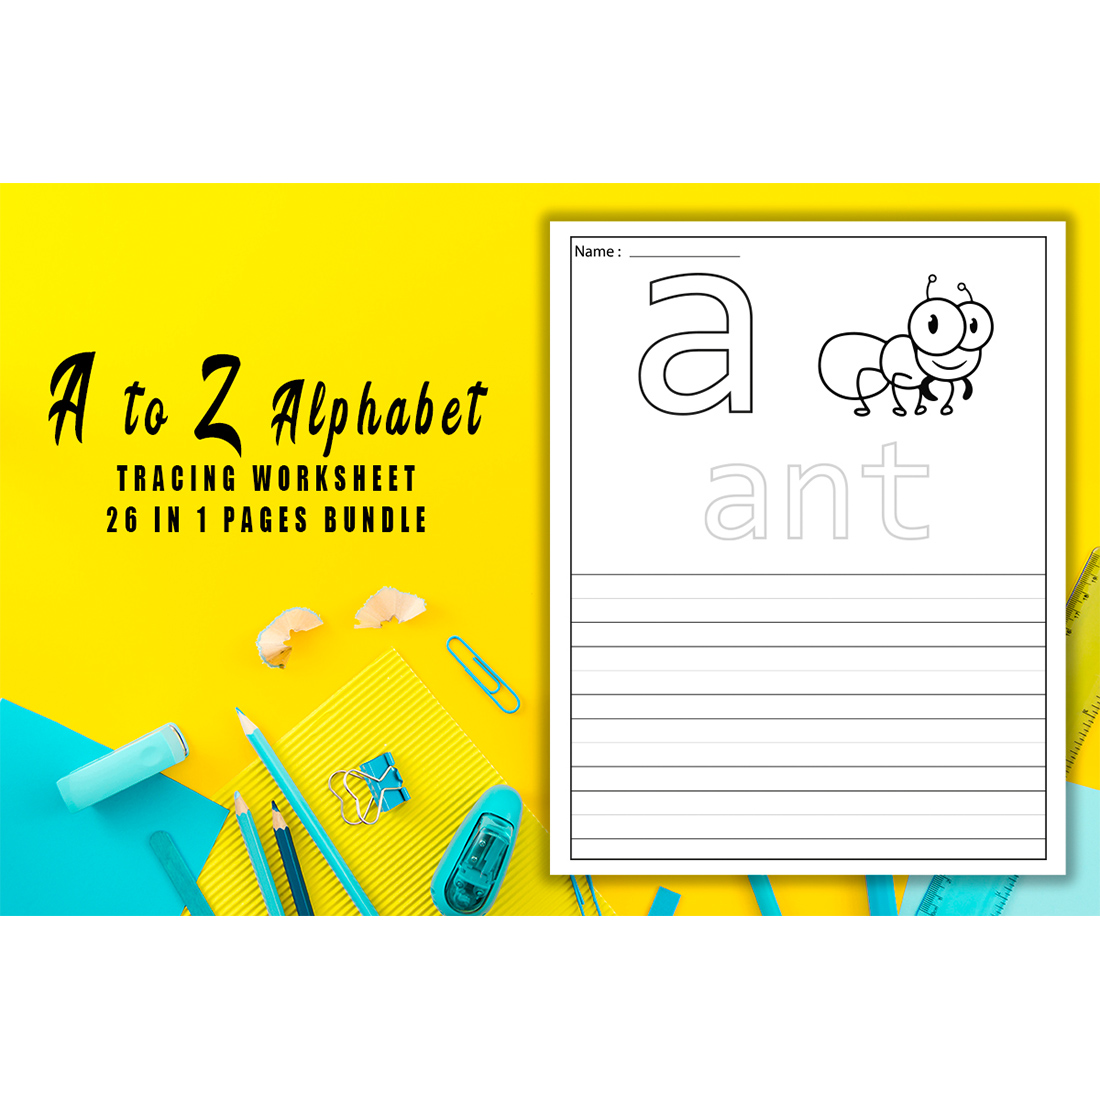 A to Z Alphabets Words Tracing Worksheets Colouring Page Bundle V.3 cover image.